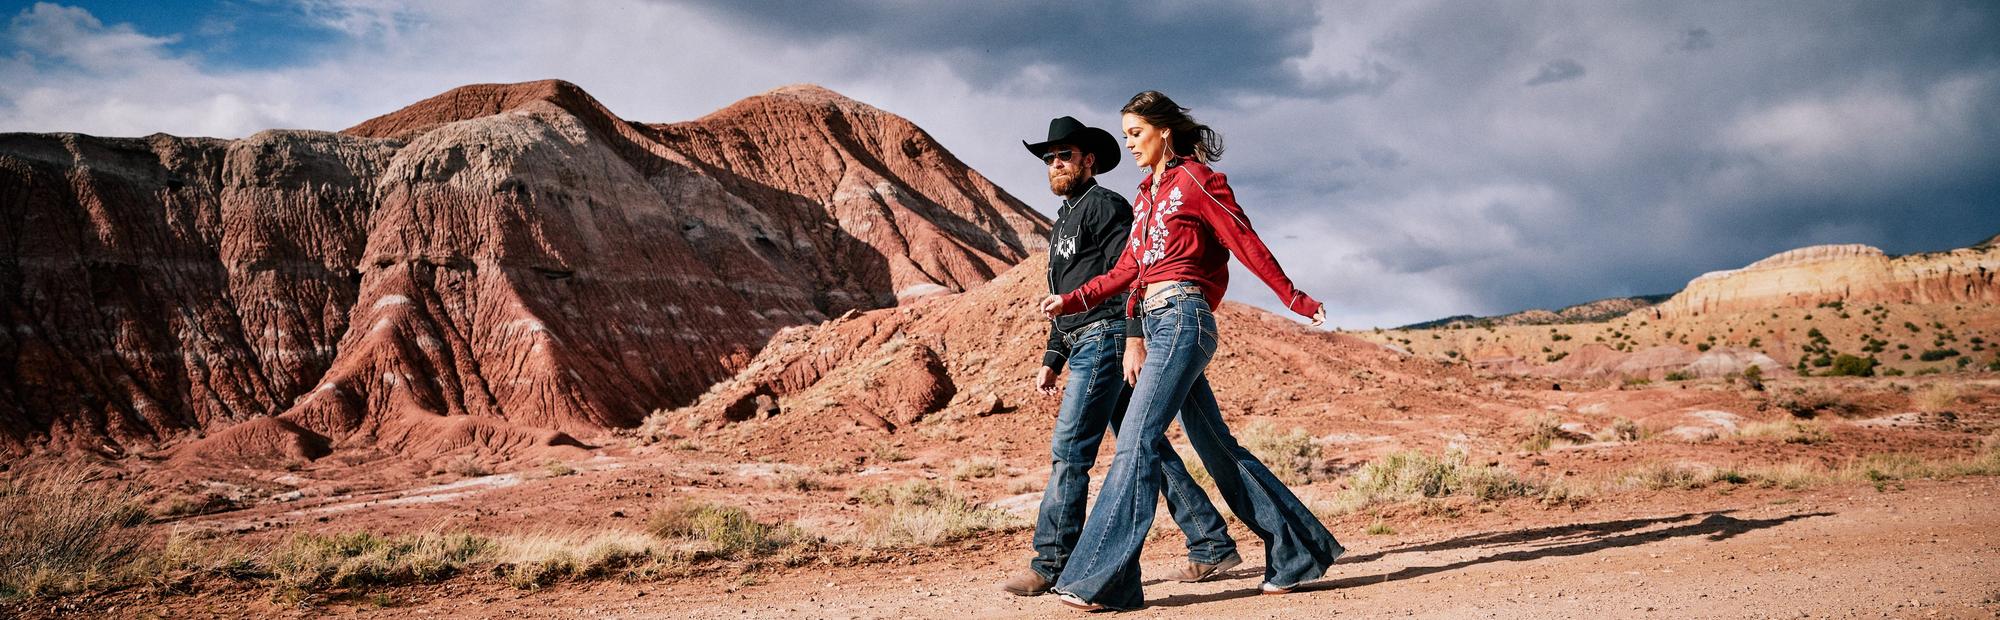 Exclusive Collab: Ariat x Chimayo